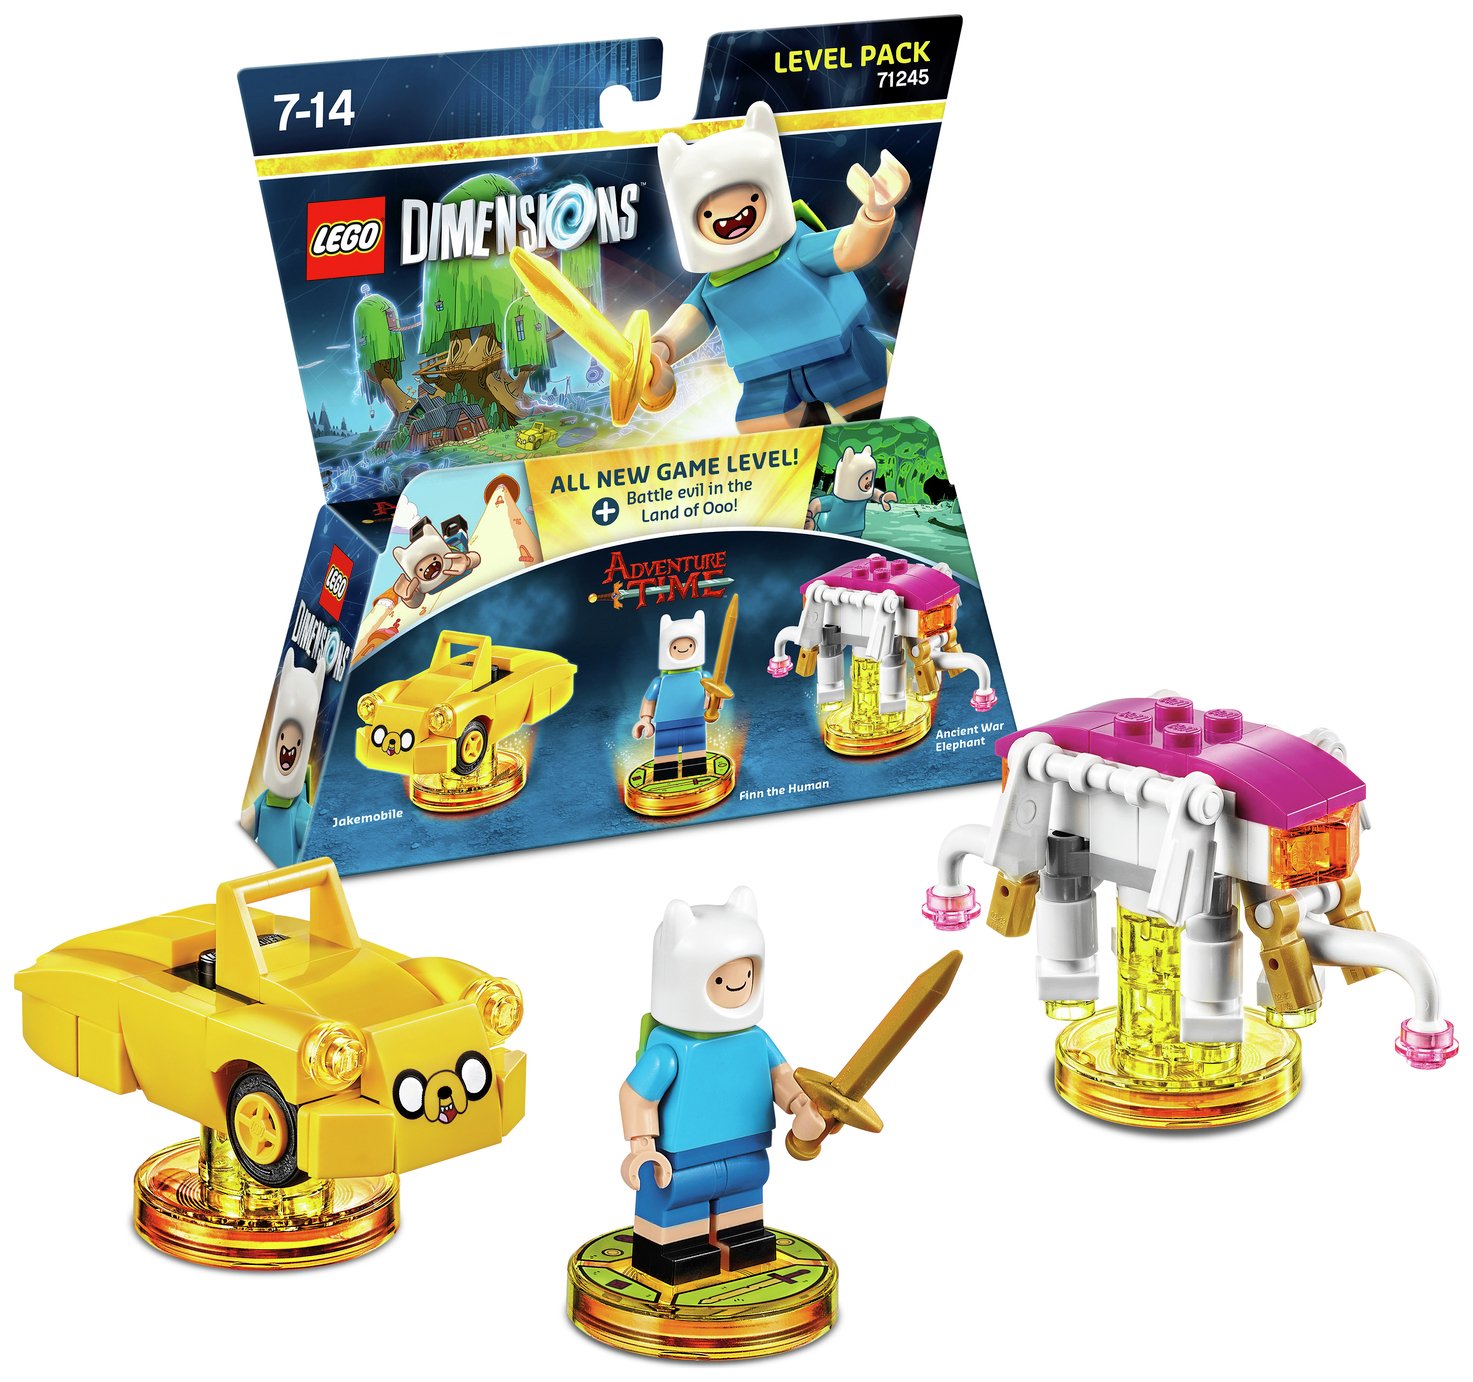 lego-dimensions-adventure-time-level-pack-game-6008178-argos-price-tracker-pricehistory-co-uk